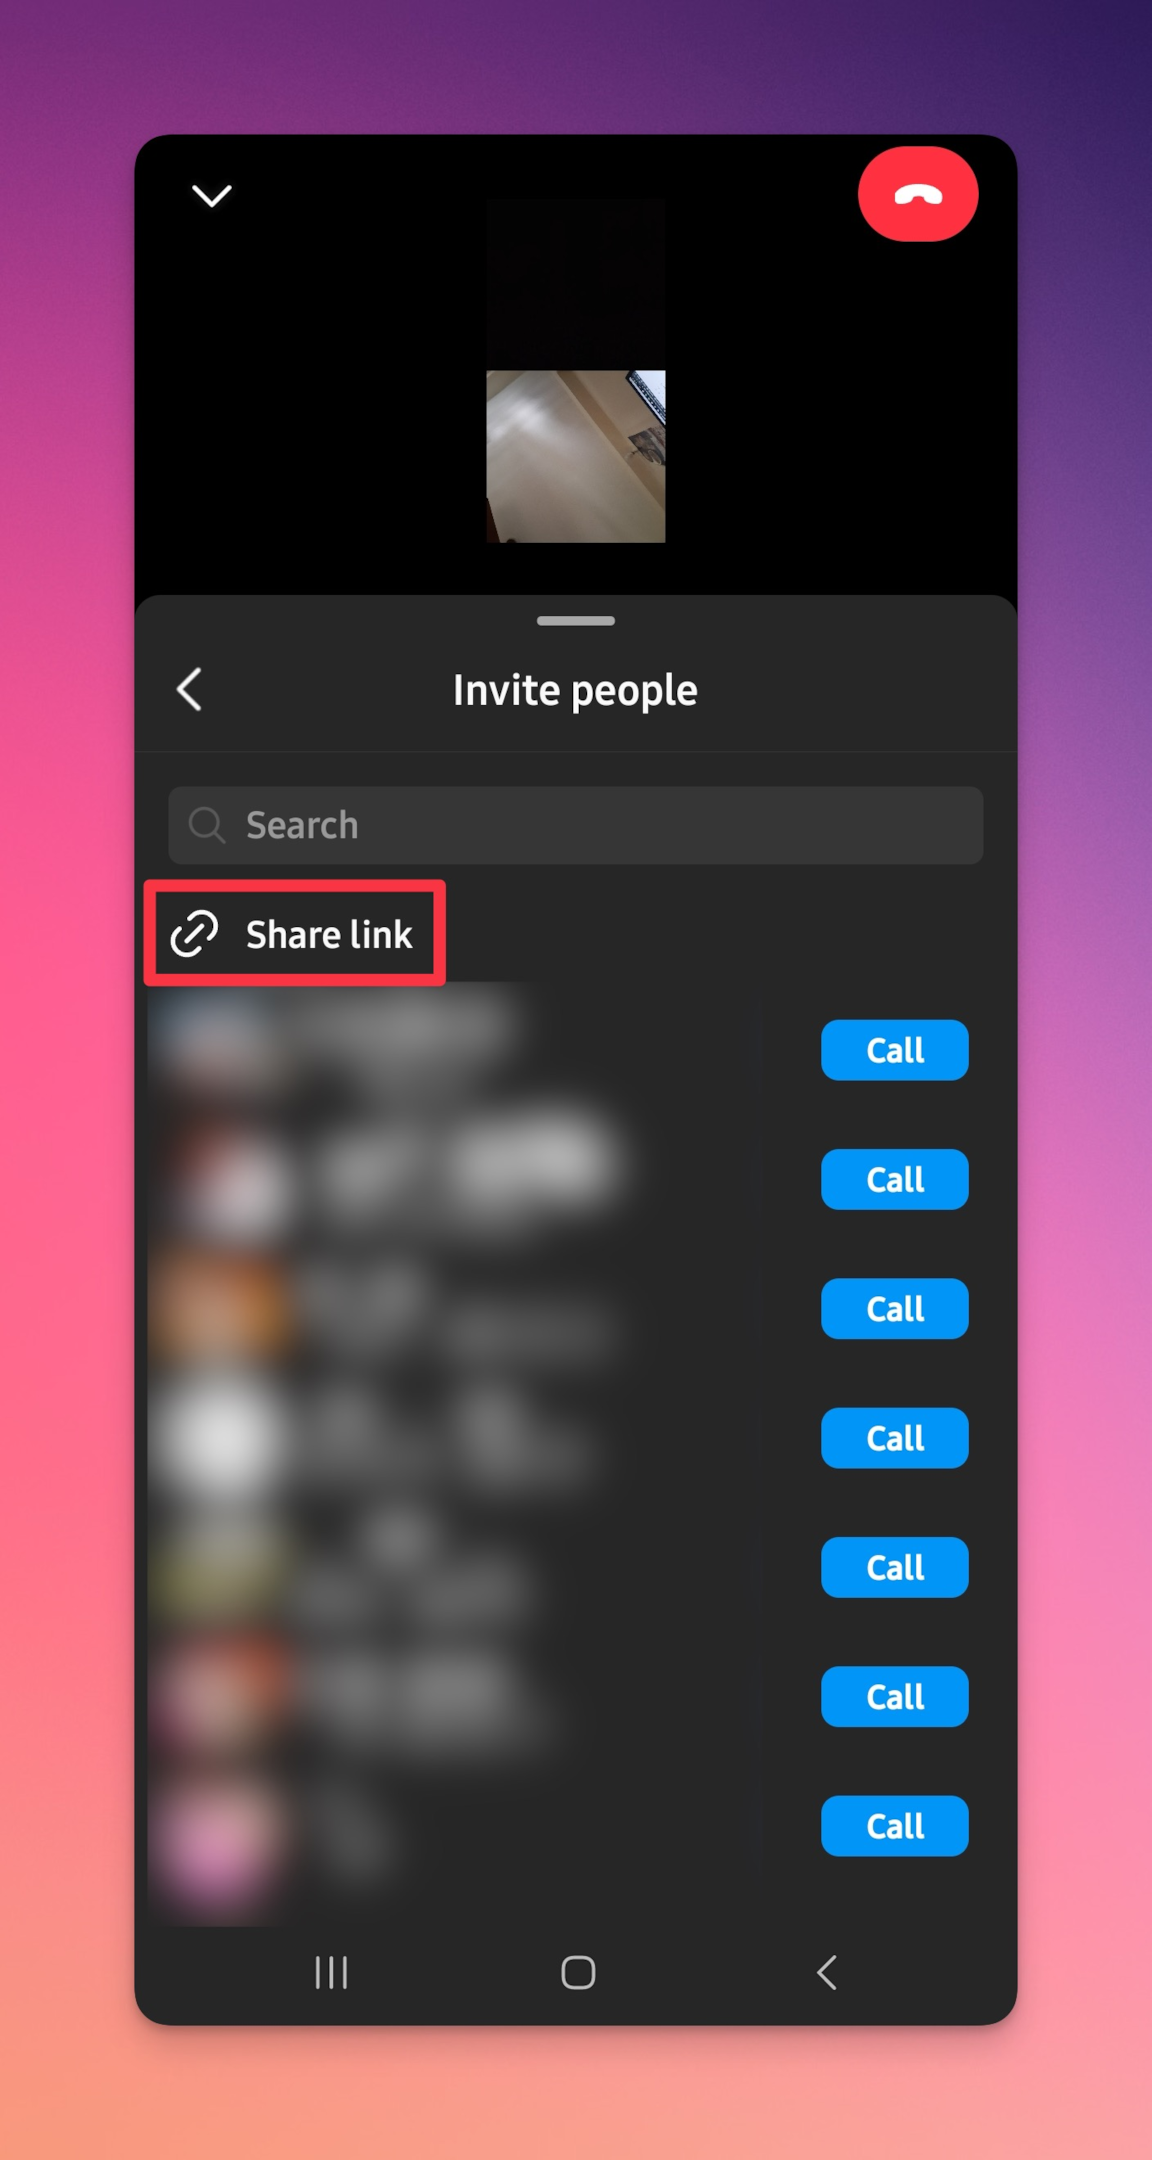 Remote.tools shows how to invite people to join your video call on Instagram. Share link button is highlighted which you can use to invite users via other messaging apps